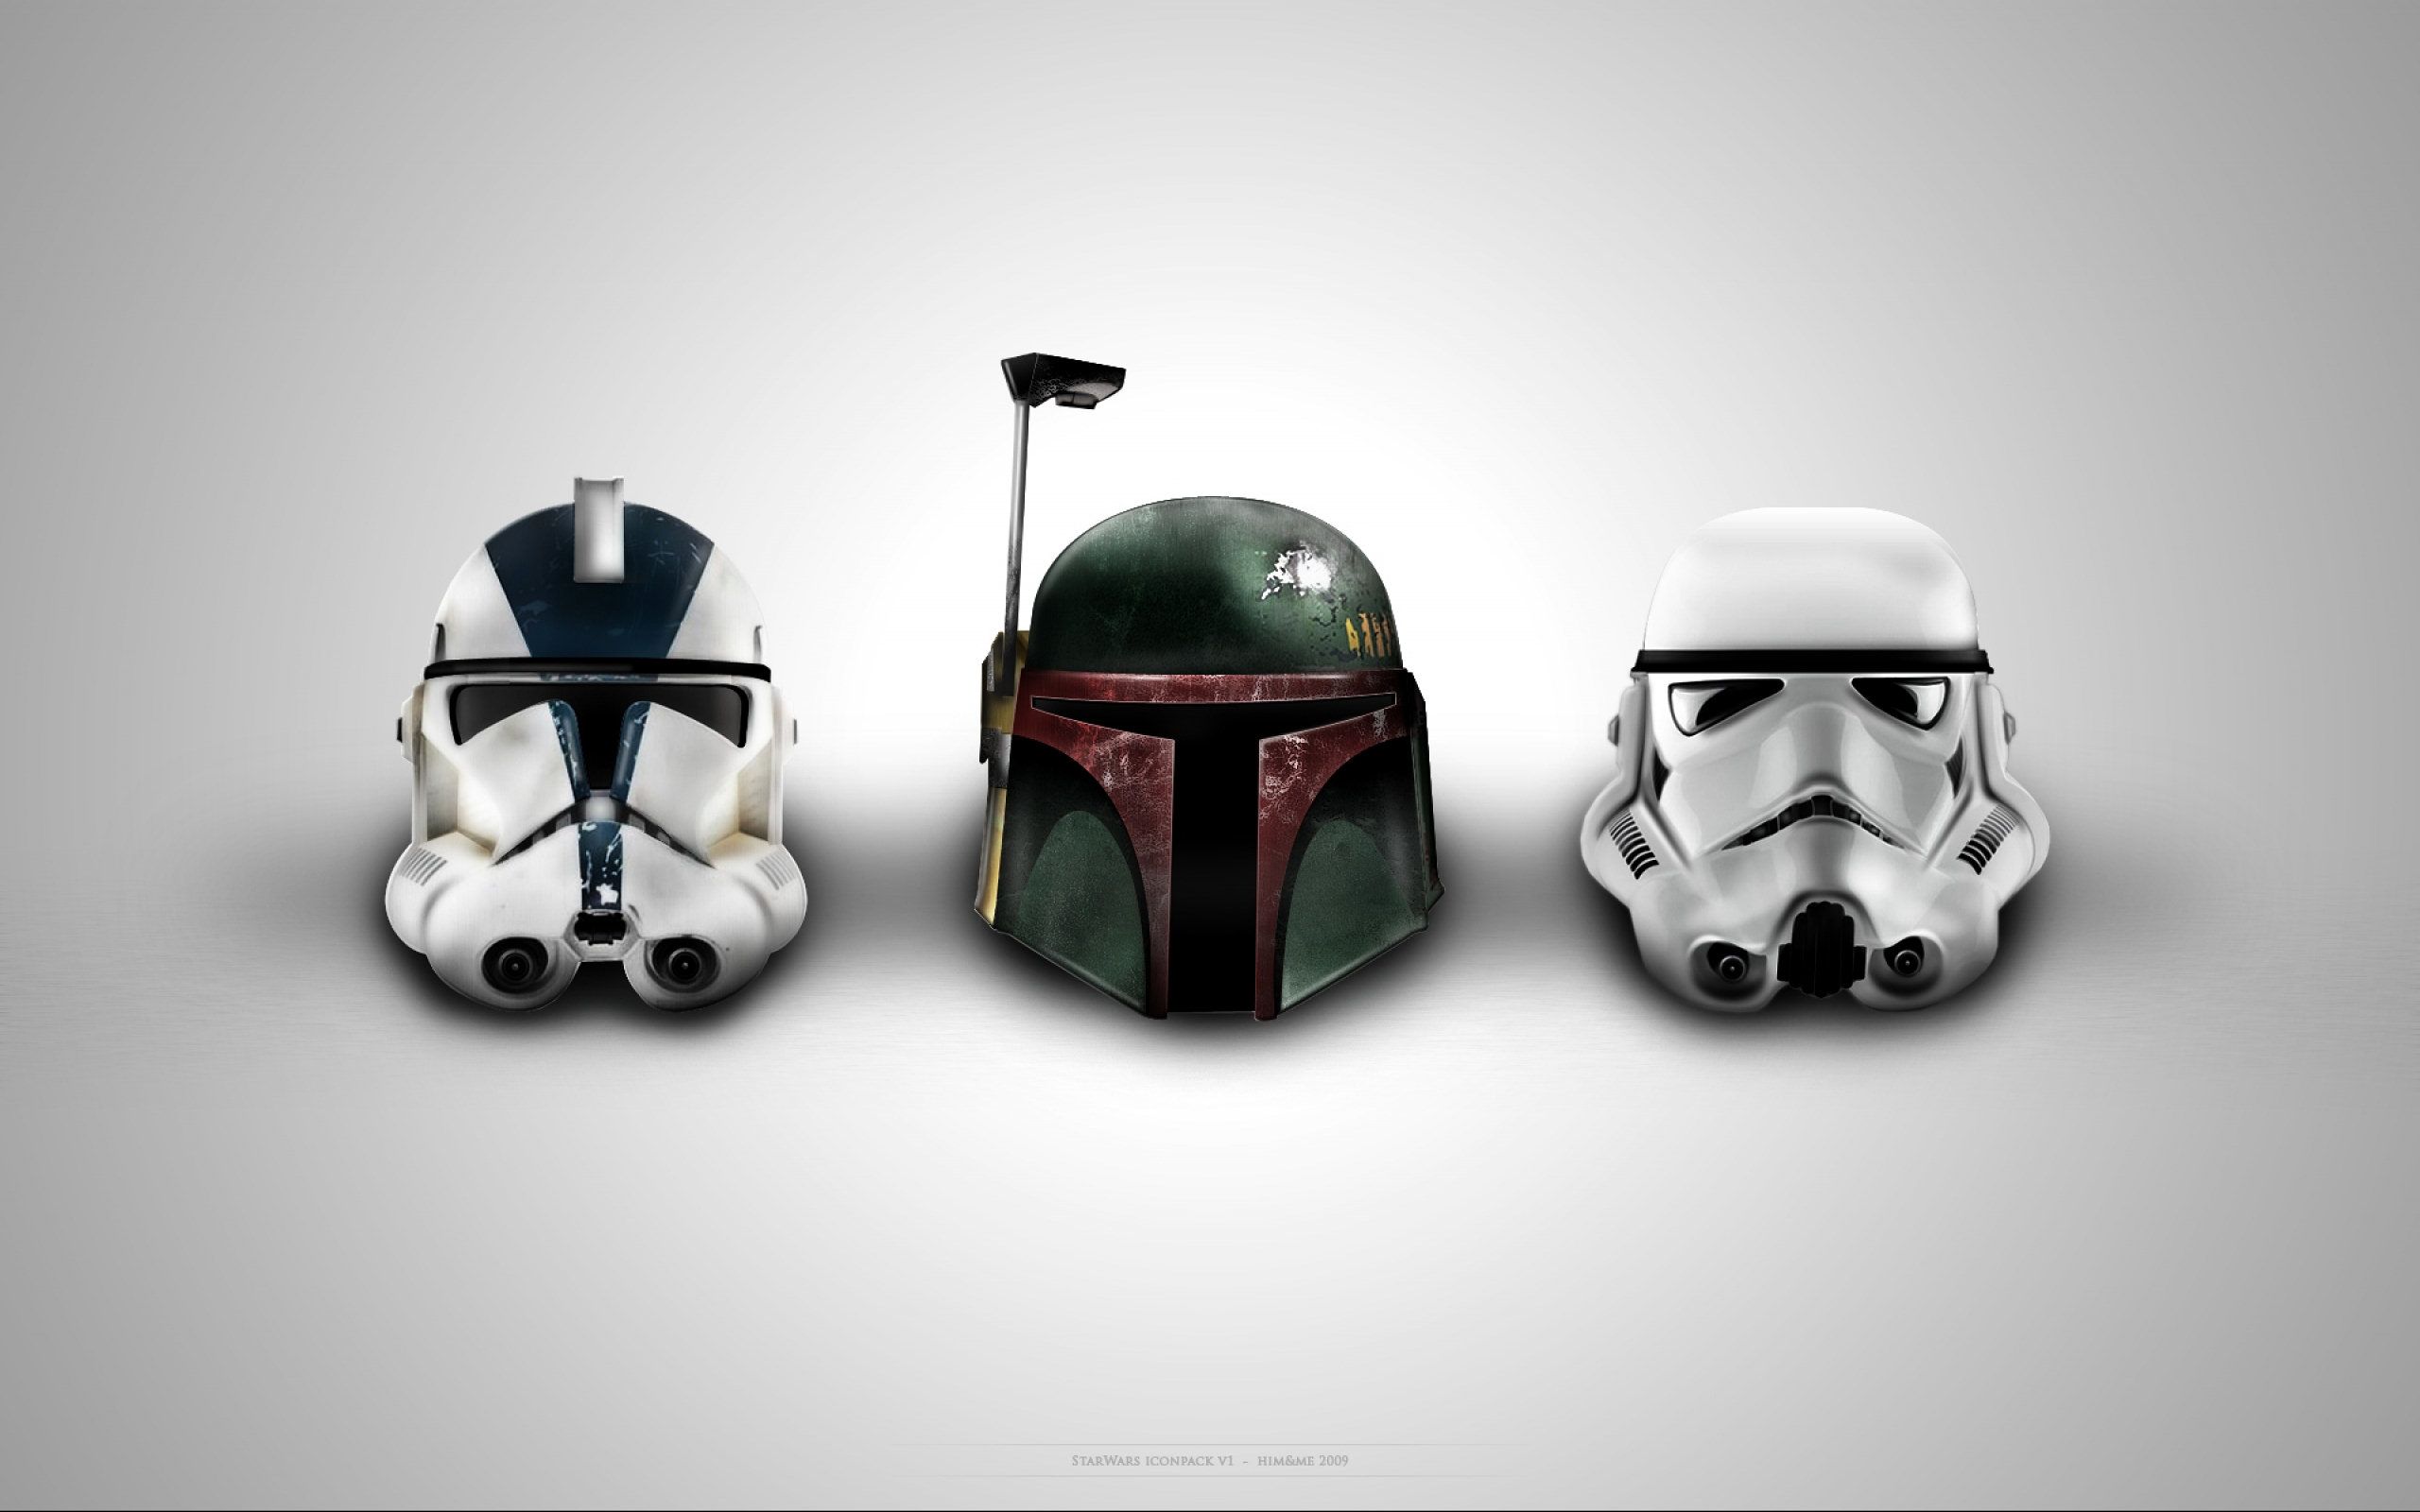 543 Star Wars HD Wallpapers | Backgrounds - Wallpaper Abyss - Page 4